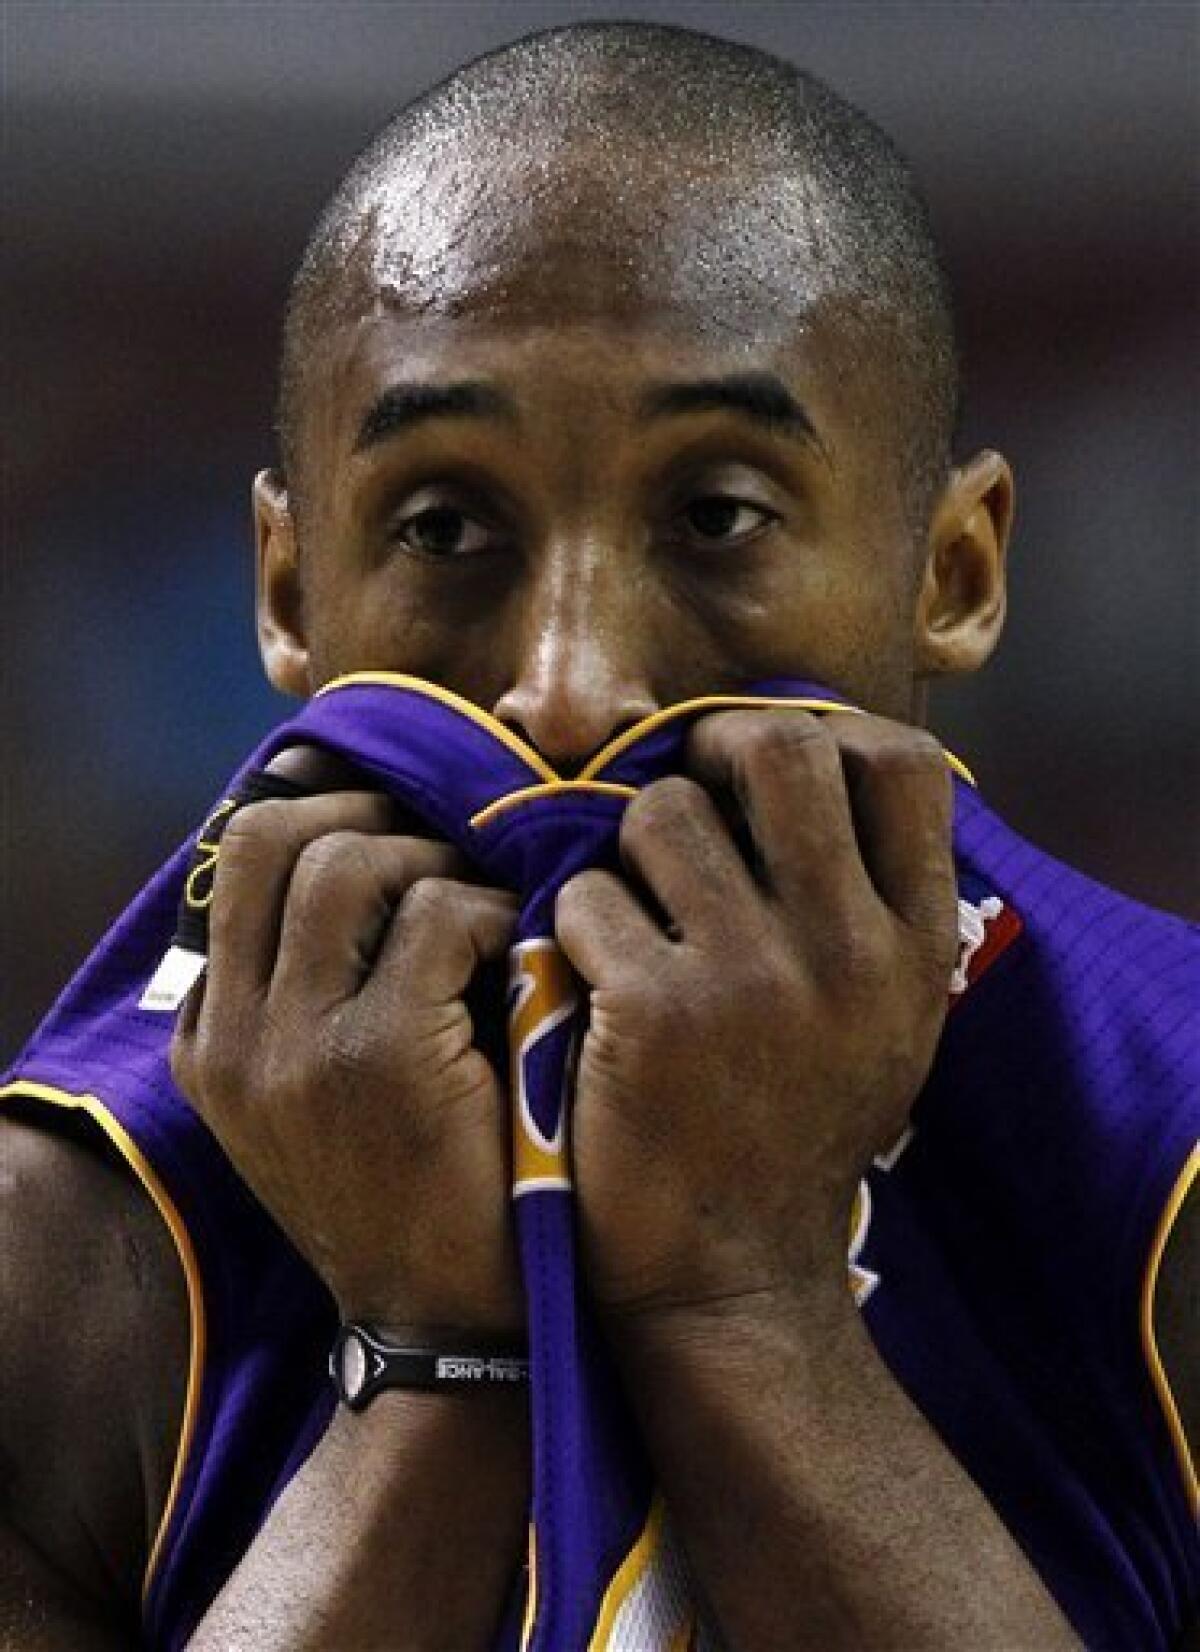 FILE - In this Dec. 17, 2010 file photo, Los Angeles Lakers' Kobe Bryant wears a Power Balance bracelet on his right wrist during an NBA basketball game against the Philadelphia 76ers in Philadelphia. Australian authorities on Tuesday, Jan. 4, 2010 said the California-based company behind the wildly popular Power Balance wristbands and pendants has no business claiming that they can improve balance, strength and flexibility. And they even got Power Balance to admit it. (AP Photo/Matt Slocum)